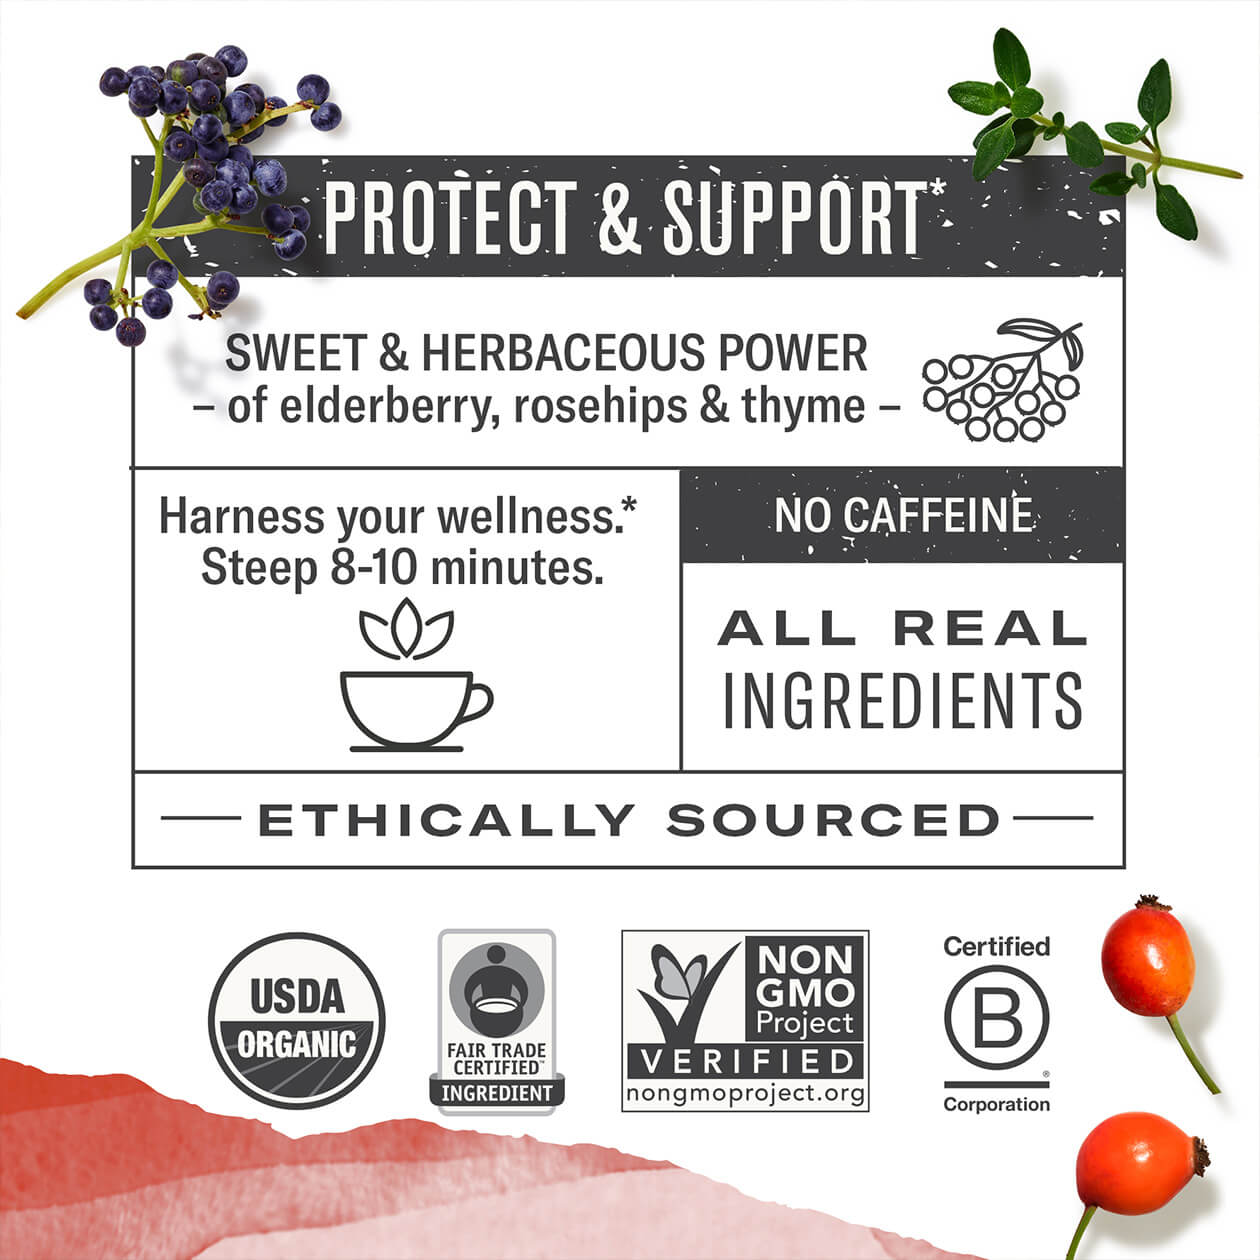 Infographic about Immune Support: steep 8-10 minutes, caffeine free, all real ingredients, ethically sourced